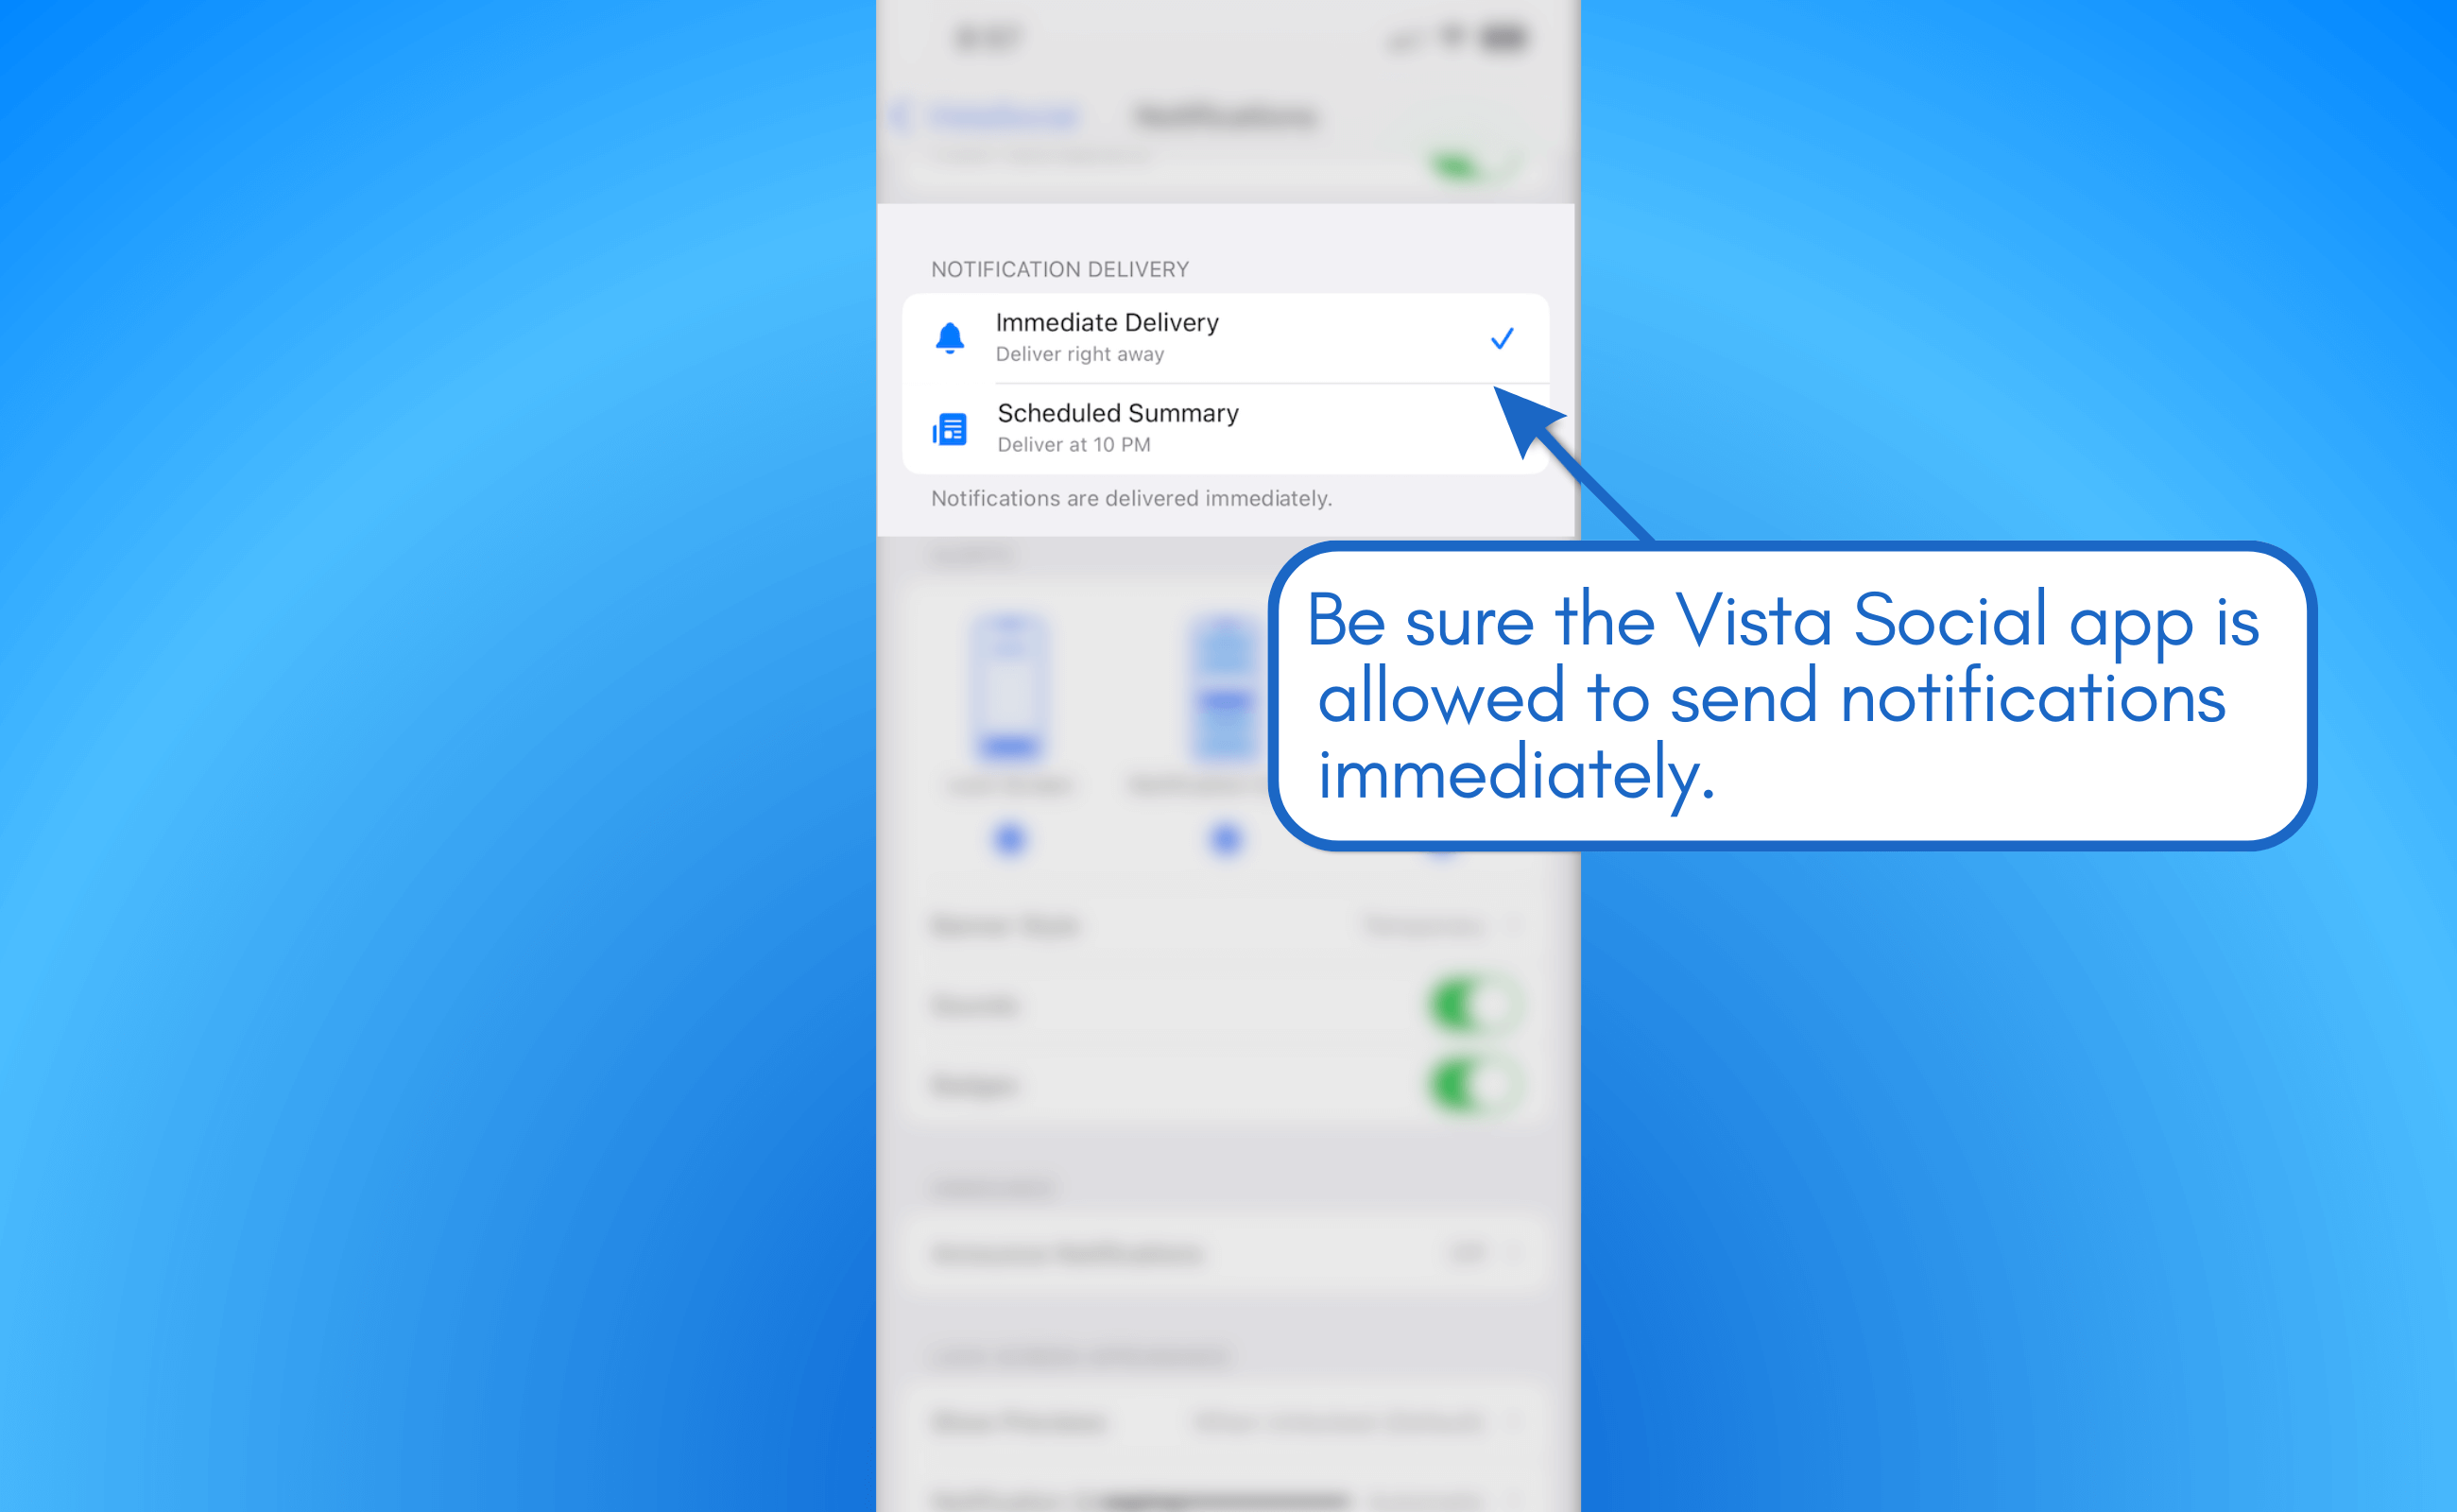 Grant the app permission to display notifications on your phone.